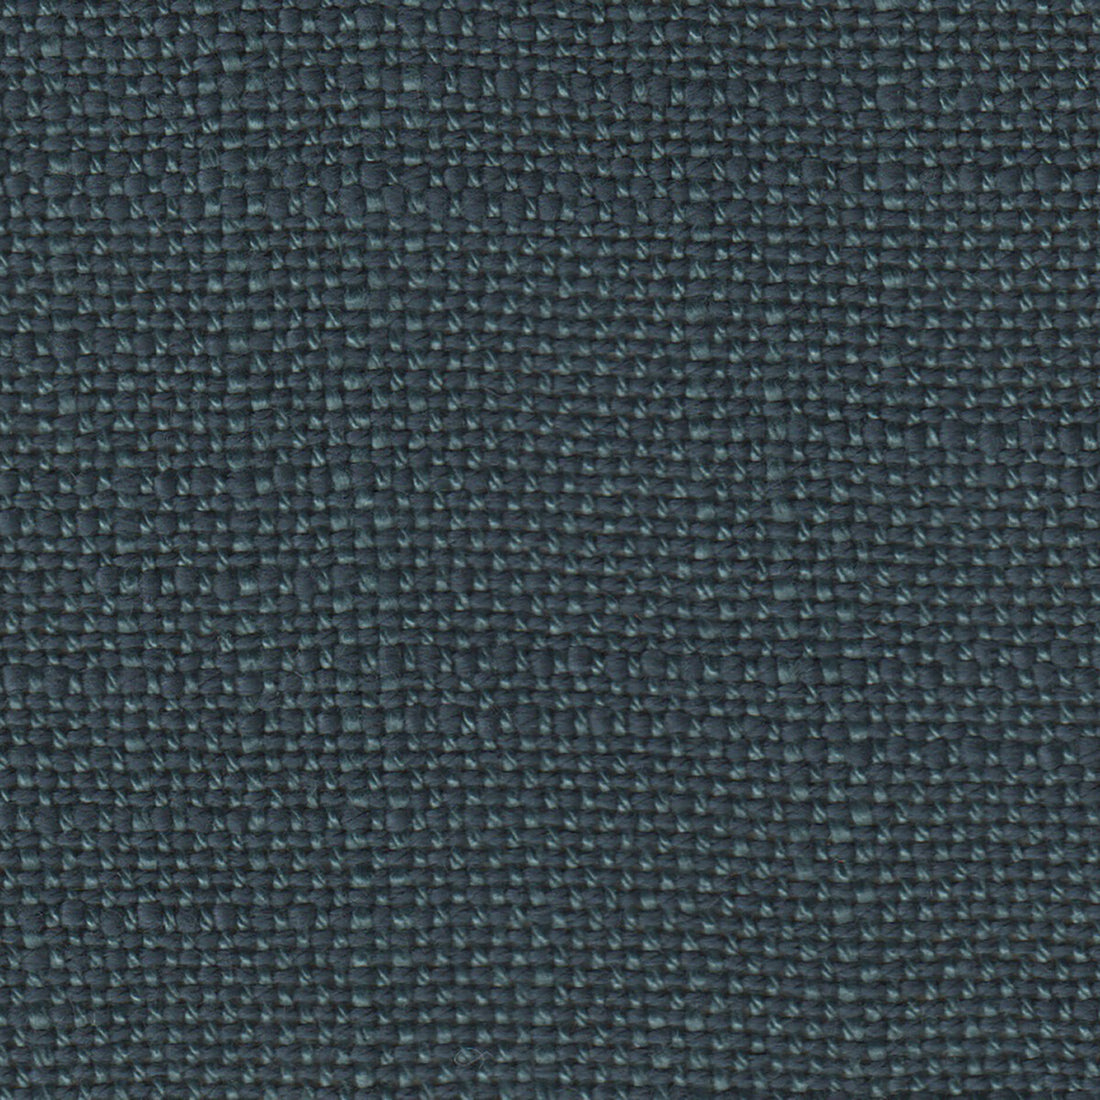 Kravet Smart fabric in 34623-5 color - pattern 34623.5.0 - by Kravet Smart in the Performance Crypton Home collection